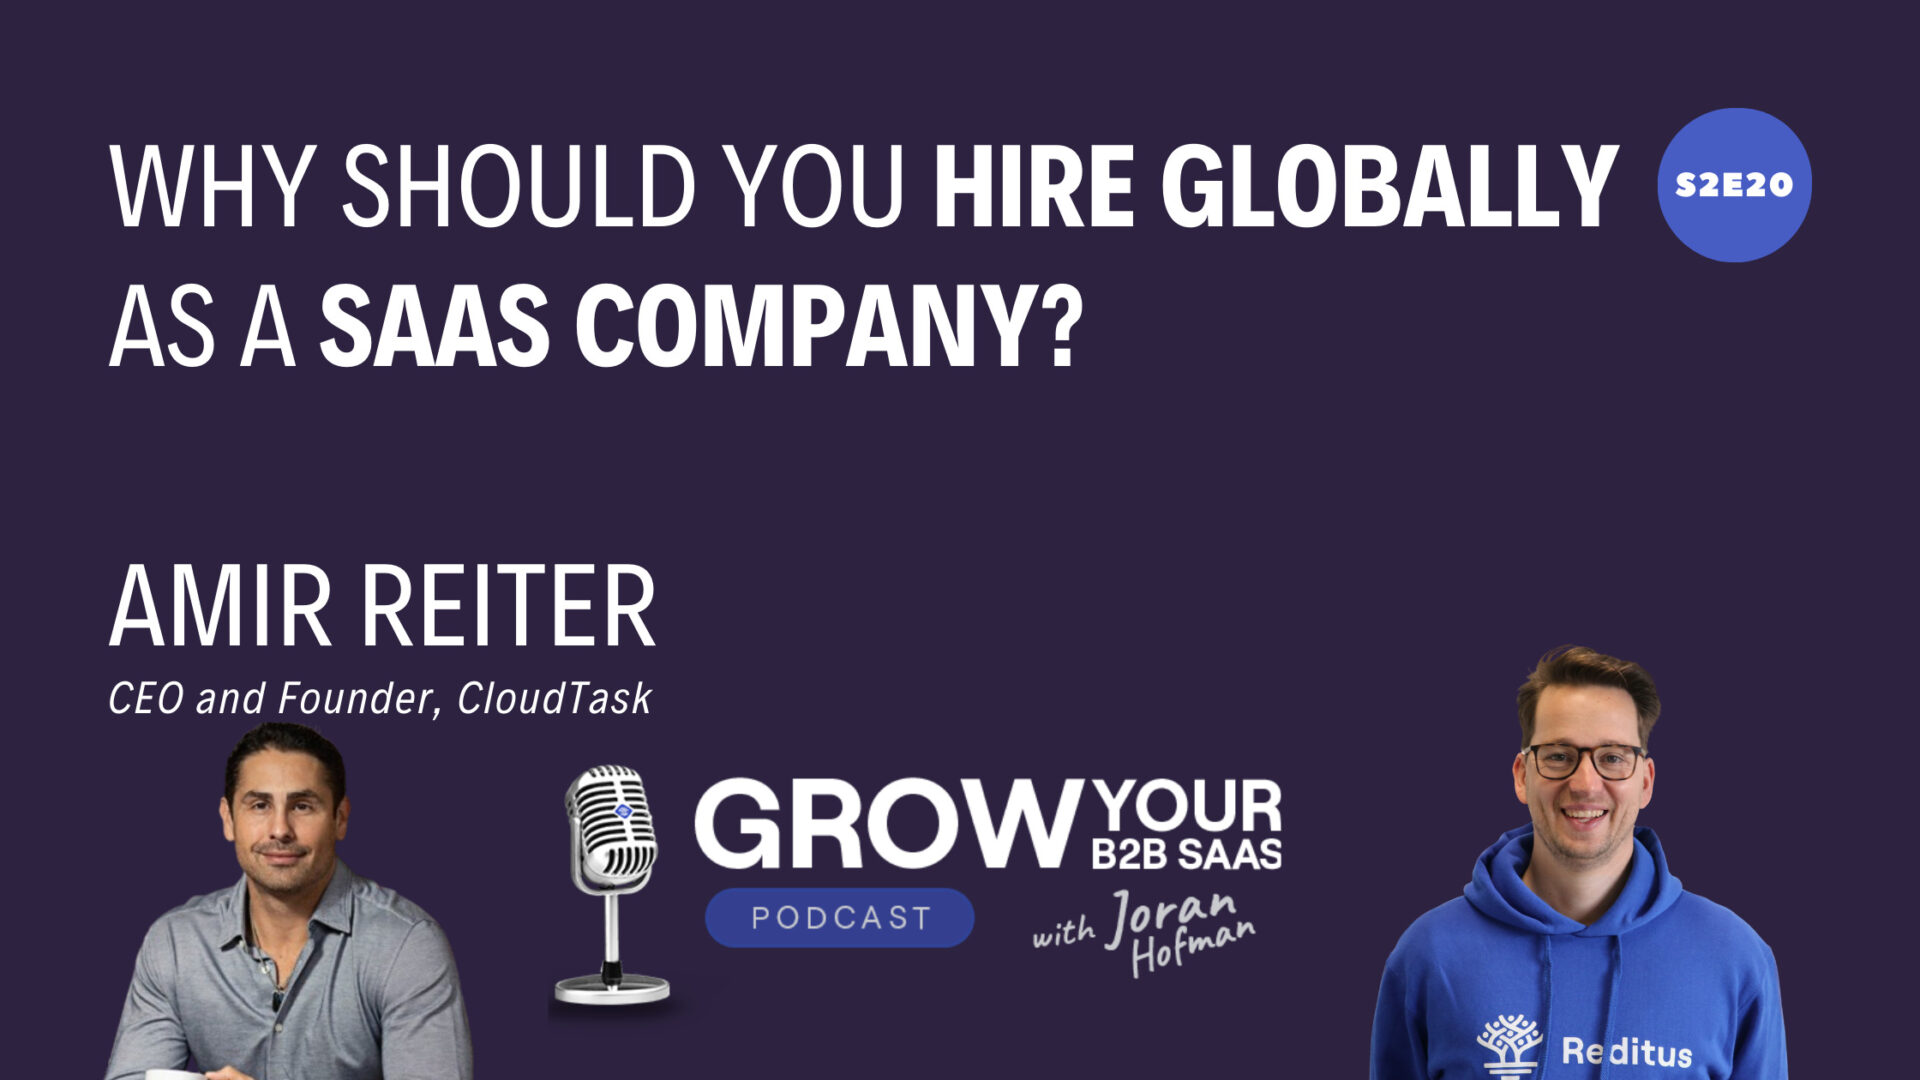 S2E20 – Why you should hire globally as a SaaS company? With Amir Reiter